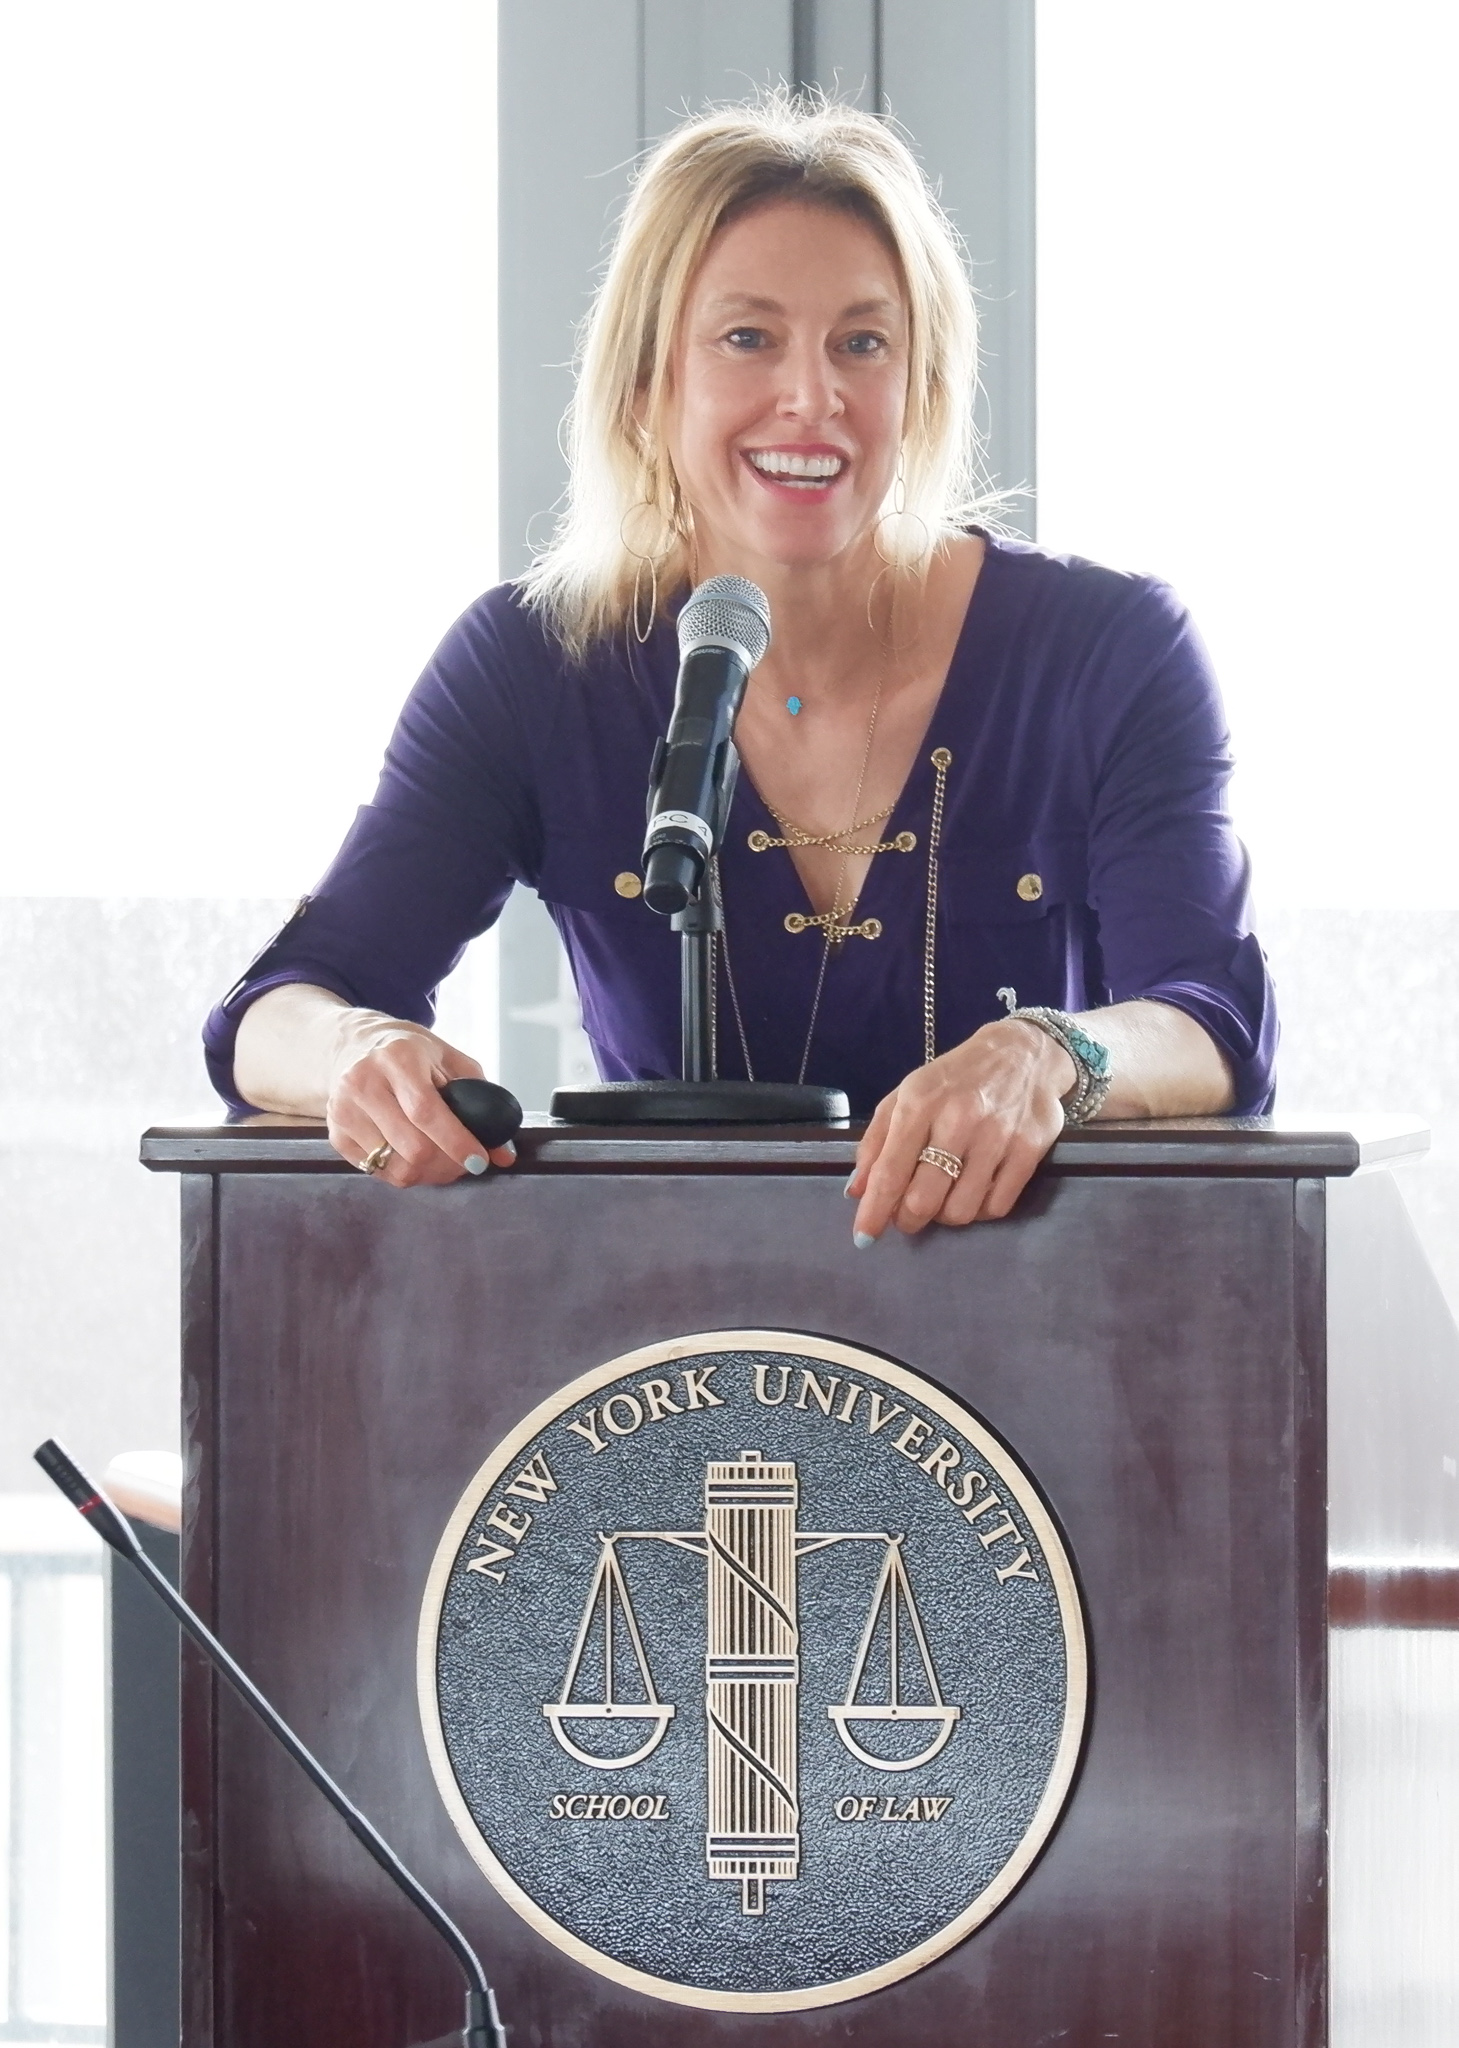 Professor Orly Lobel behind the podium with an NYU seal